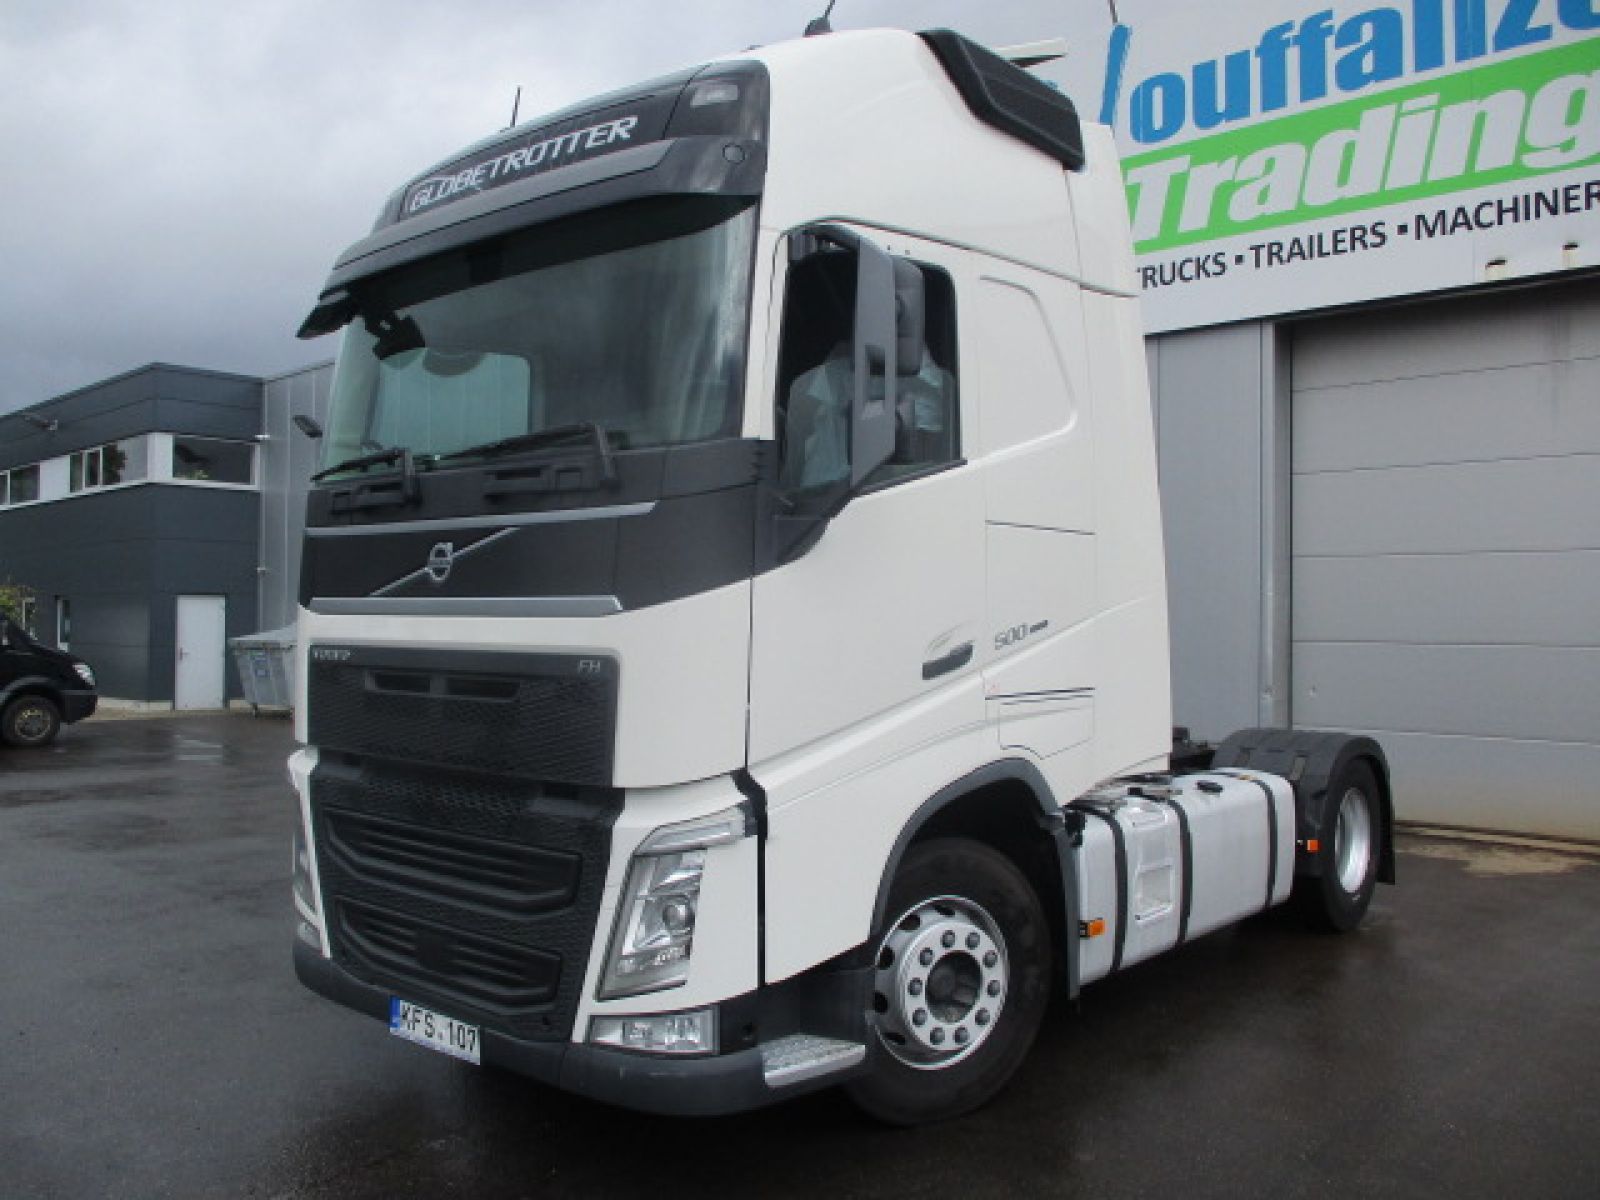 Unidades tractoras - VOLVO FH 500  TRACTEUR (Belgique - Europe) - Houffalize Trading s.a.